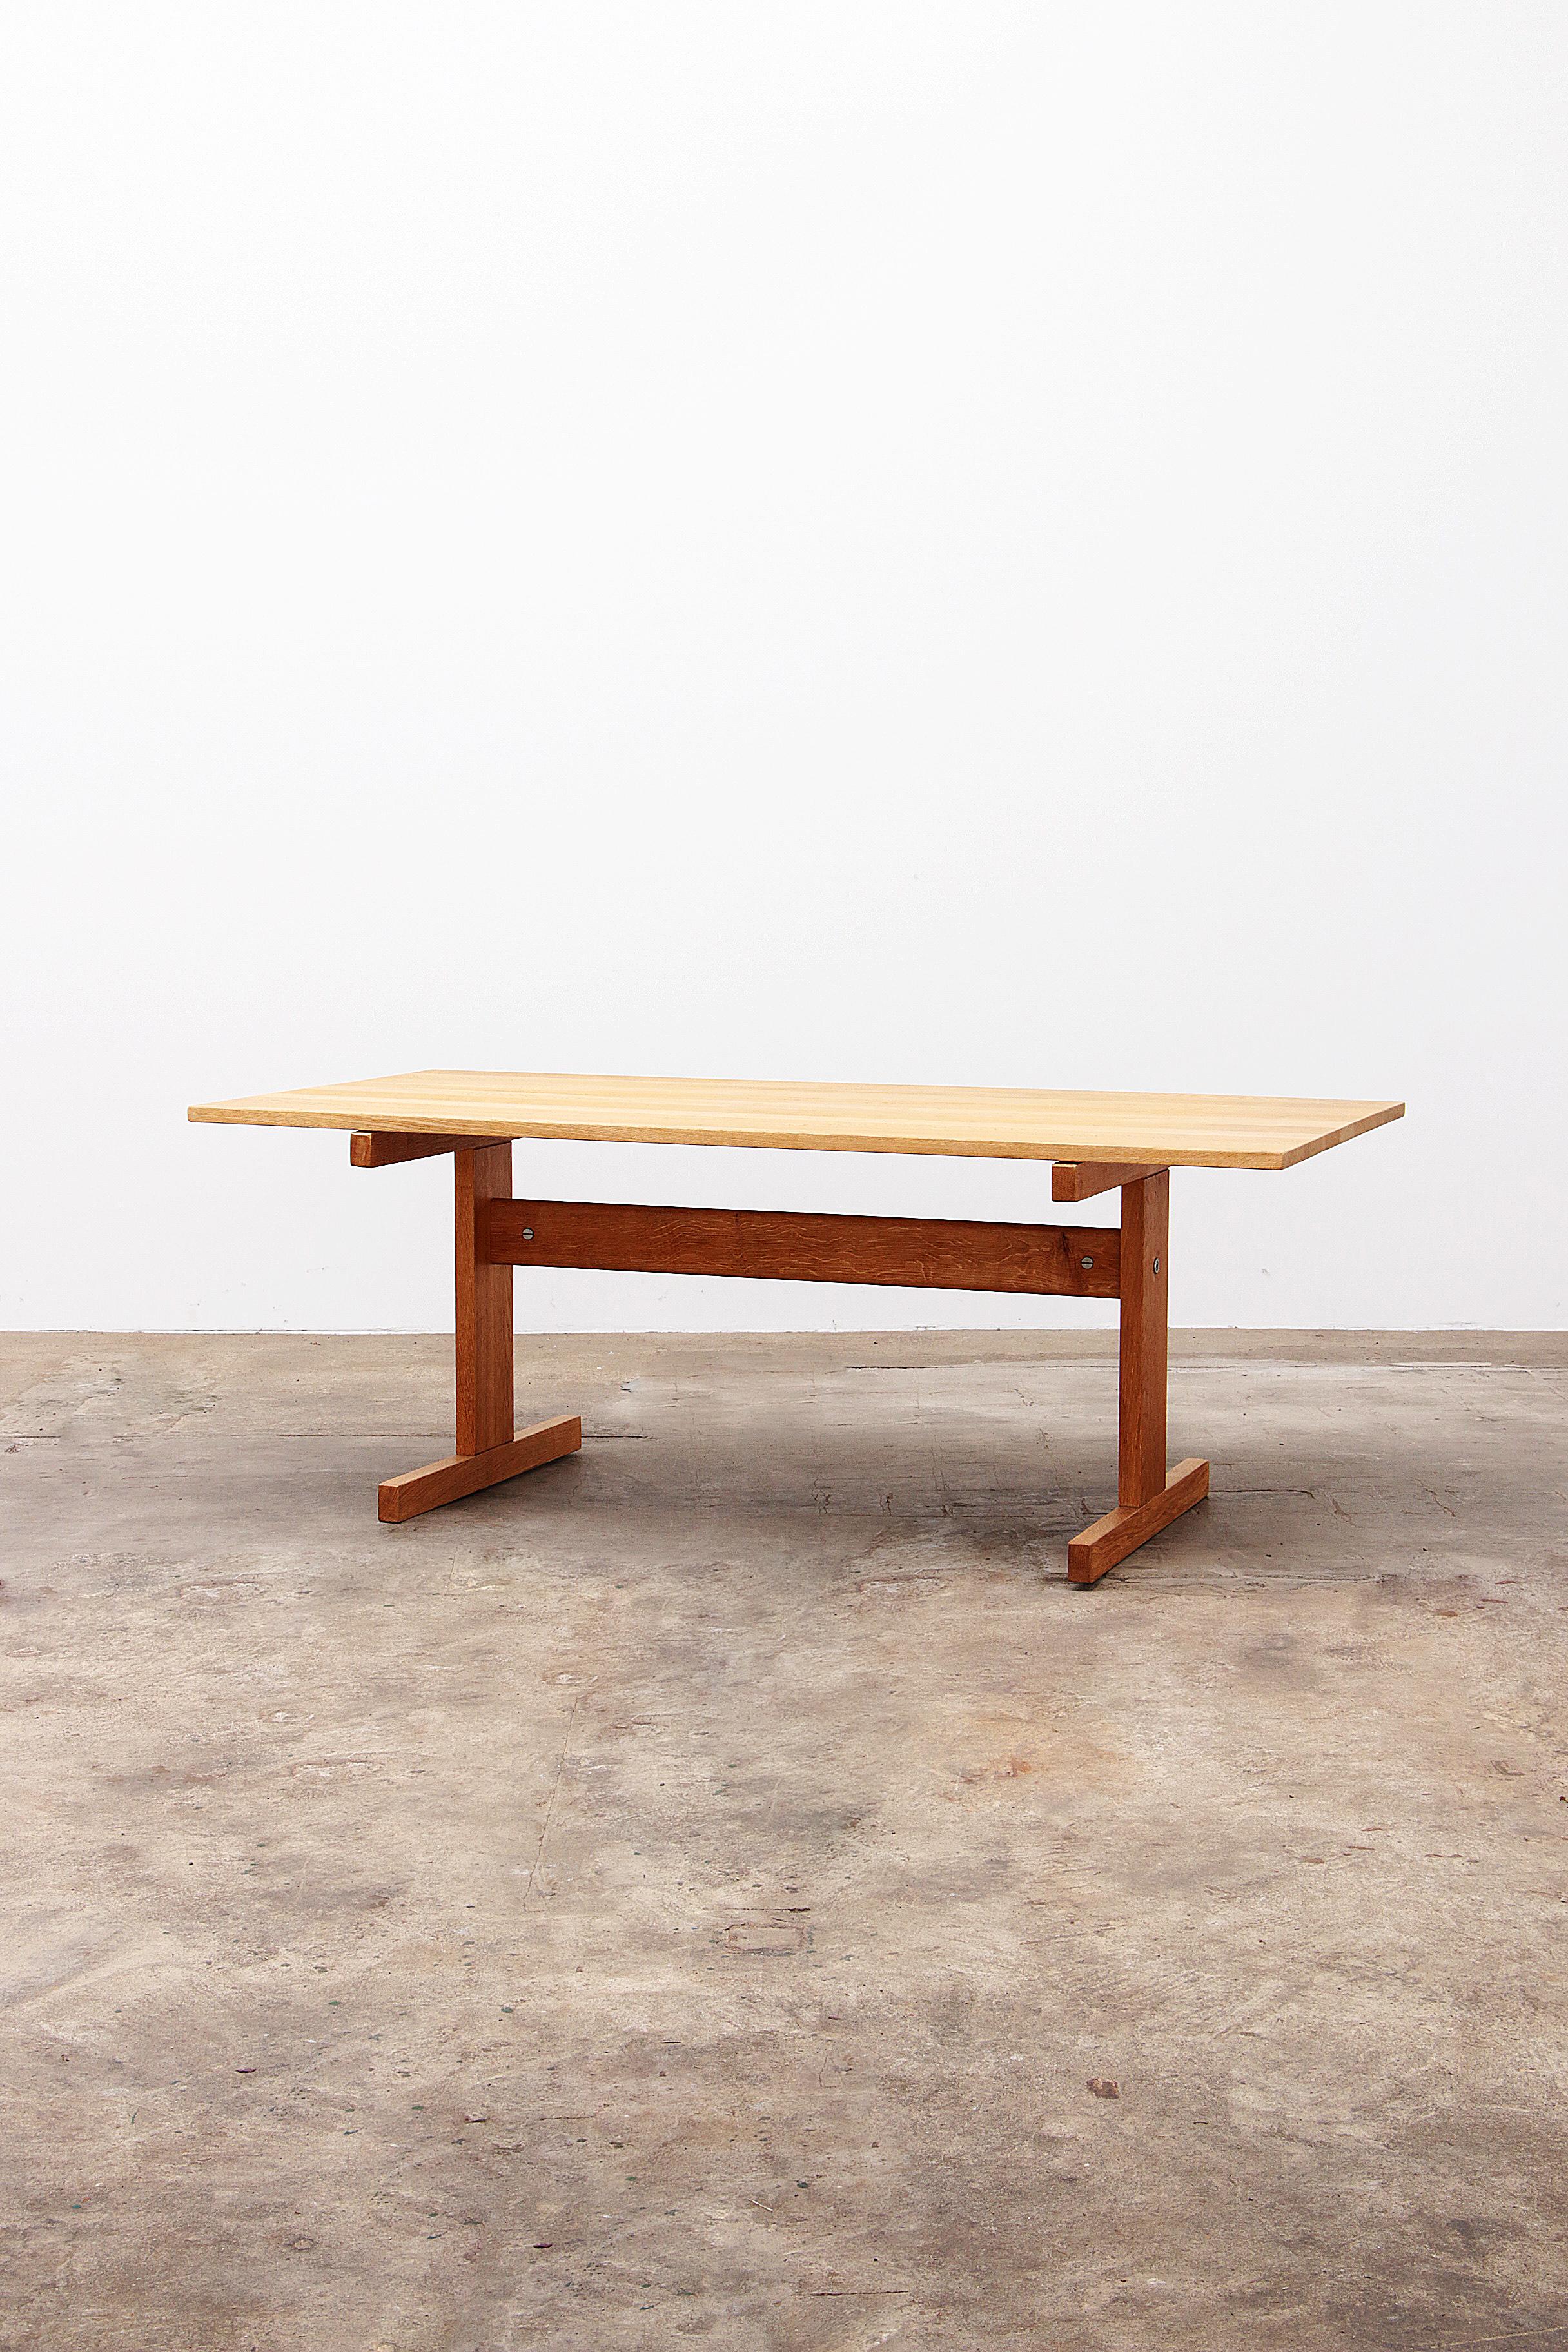 Danish oak dining table Hans J. Wegner for Andreas Tuck, 1960s.

This Danish minimalist dining table in light oak was designed by Hans J. Wegner in the 1960s. Hans J. Wegner was one of the Great Danes who had his furniture manufactured by Andres